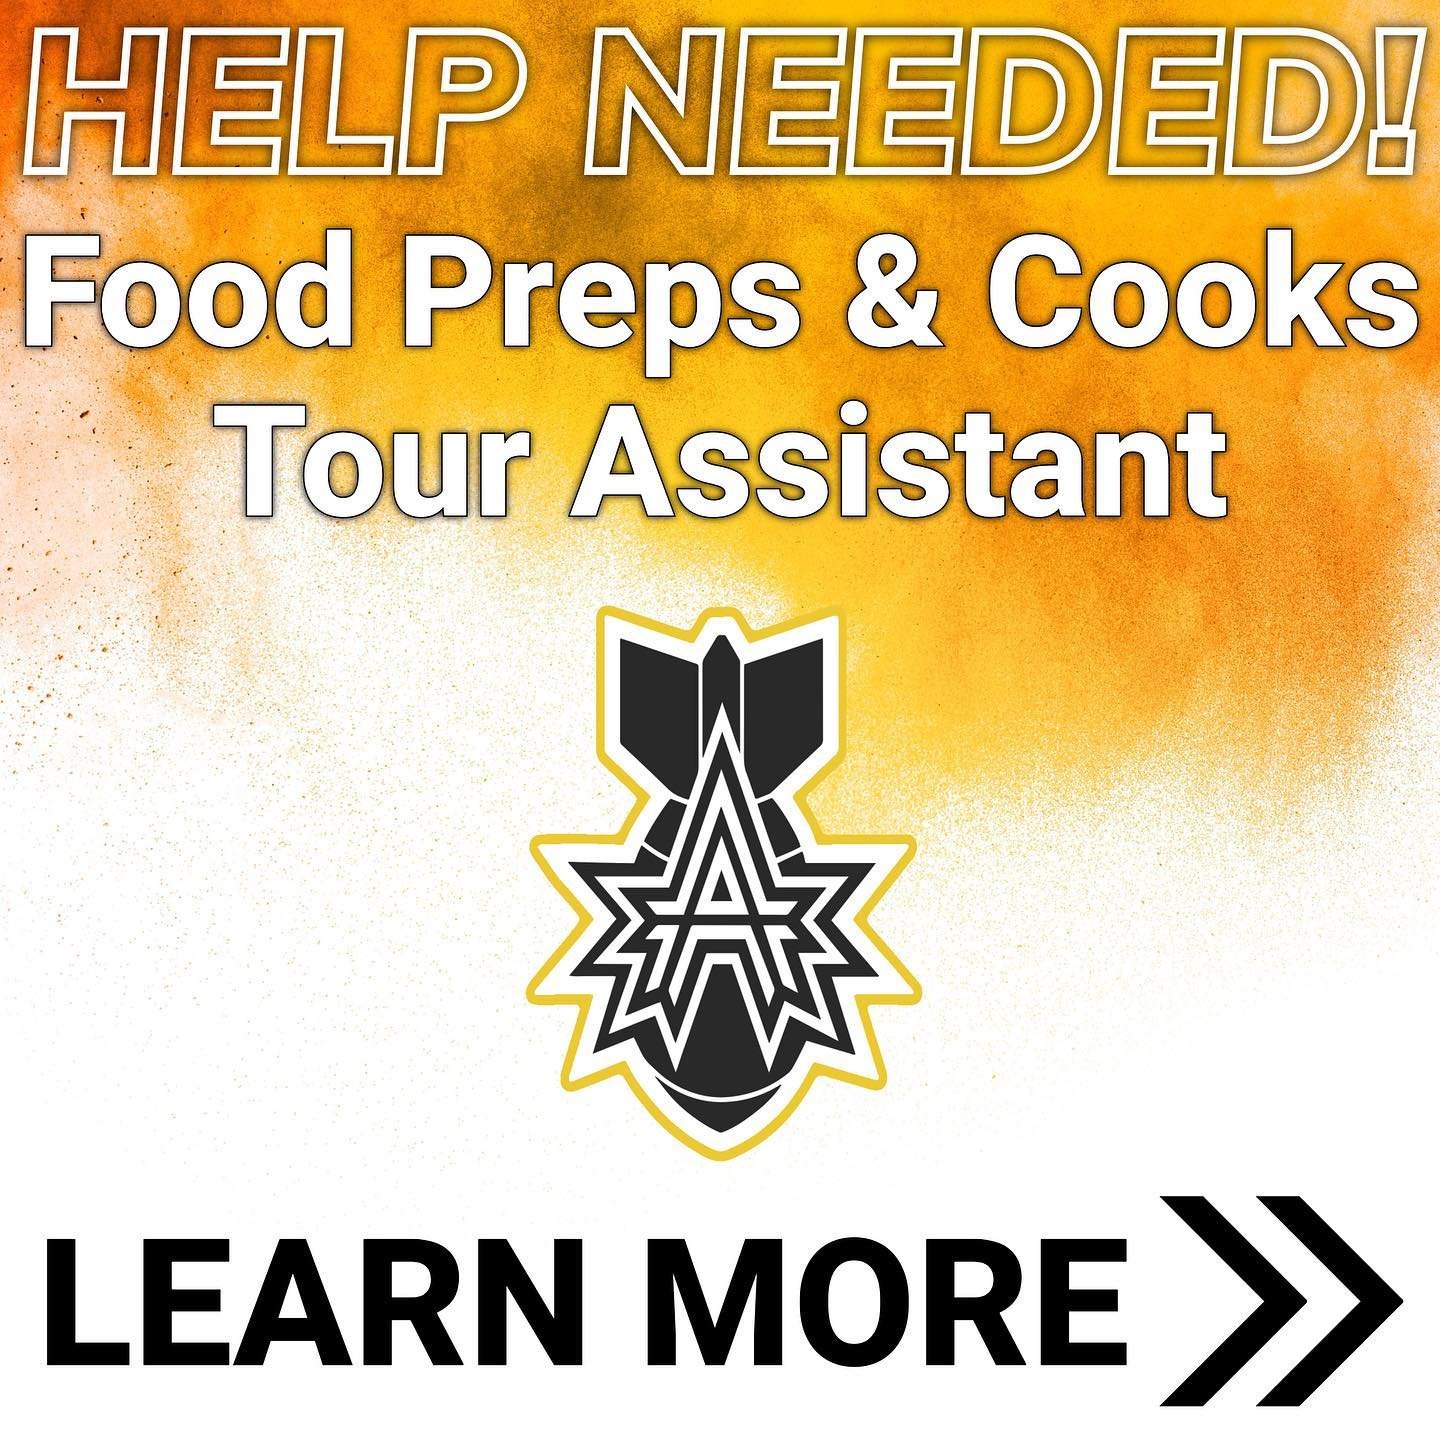 Arsenal DBC is looking for help this summer! Volunteers are needed for food preps/cooks and a tour assistant. Perks include four meals per day, housing, travel, show access, and a great experience! If you are interested, let us know with a message! 
